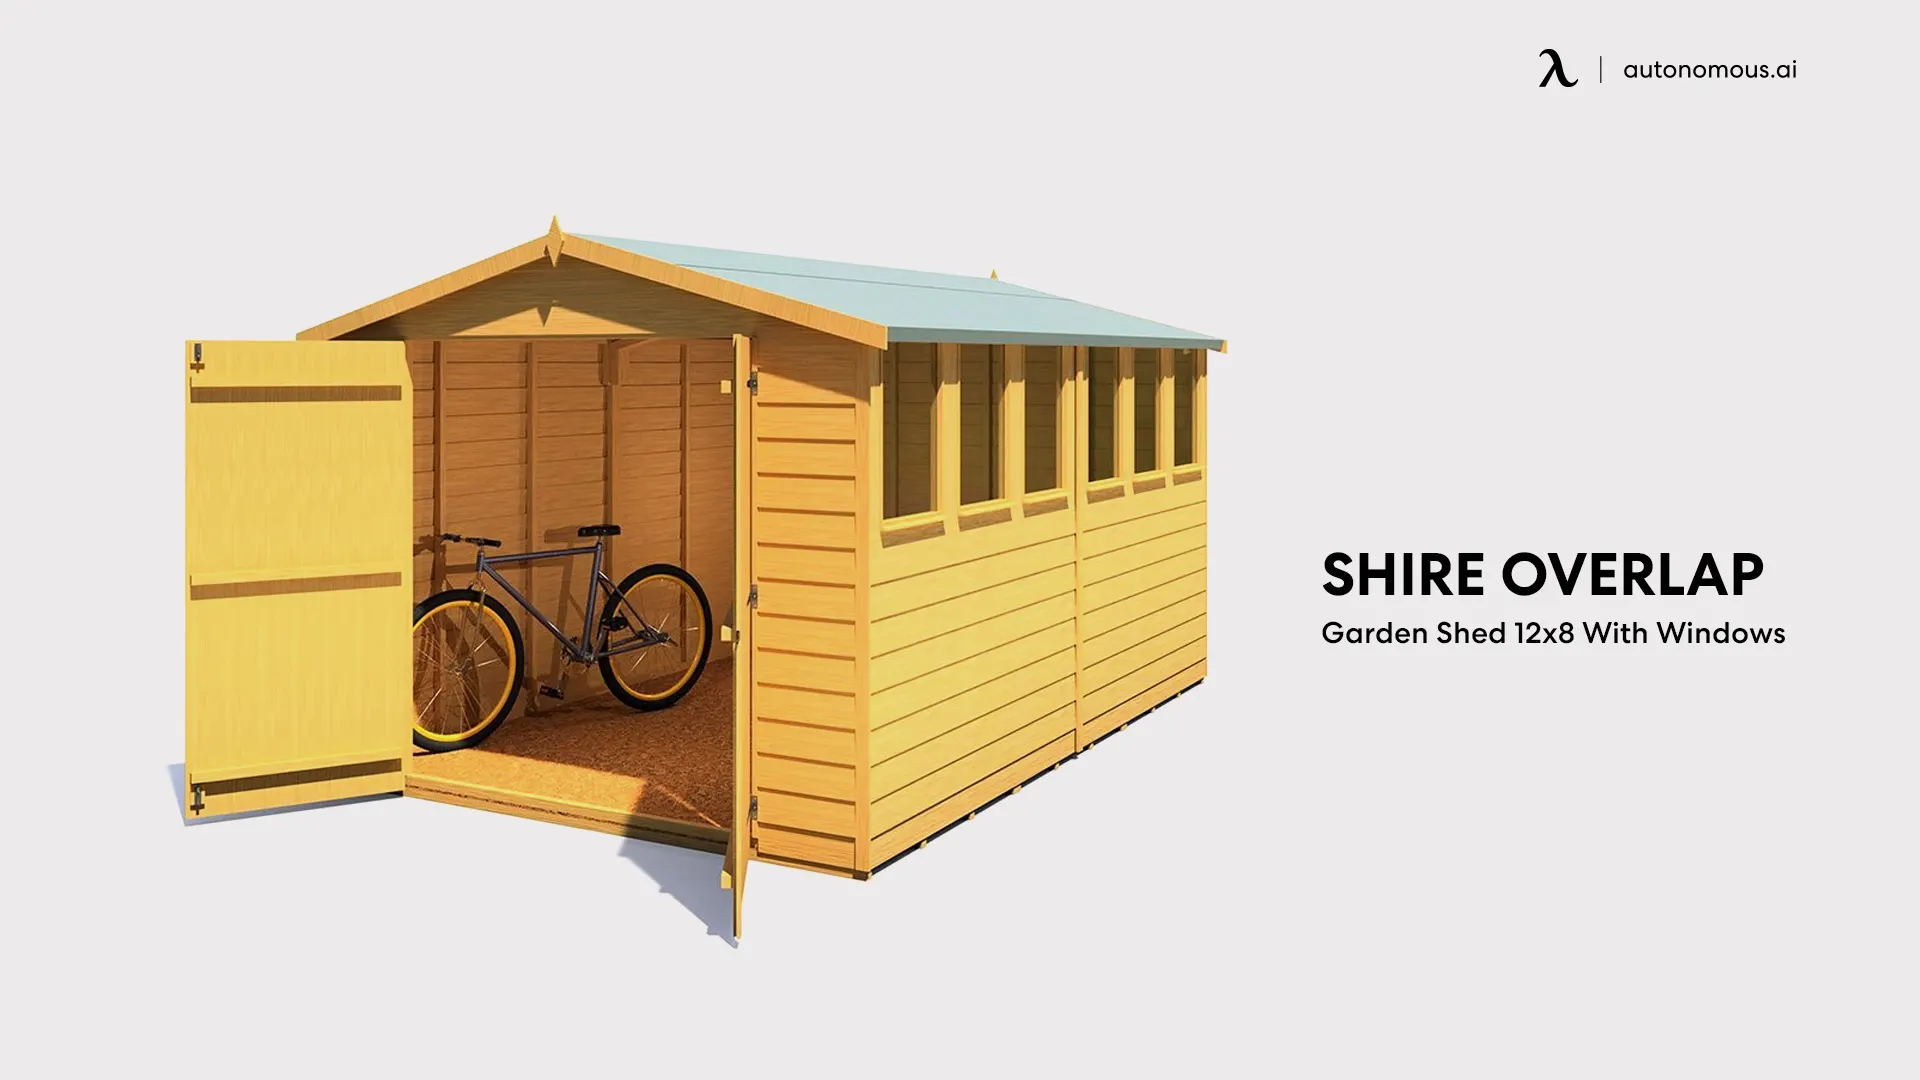 Shire Overlap Garden Shed 12x8 With Windows